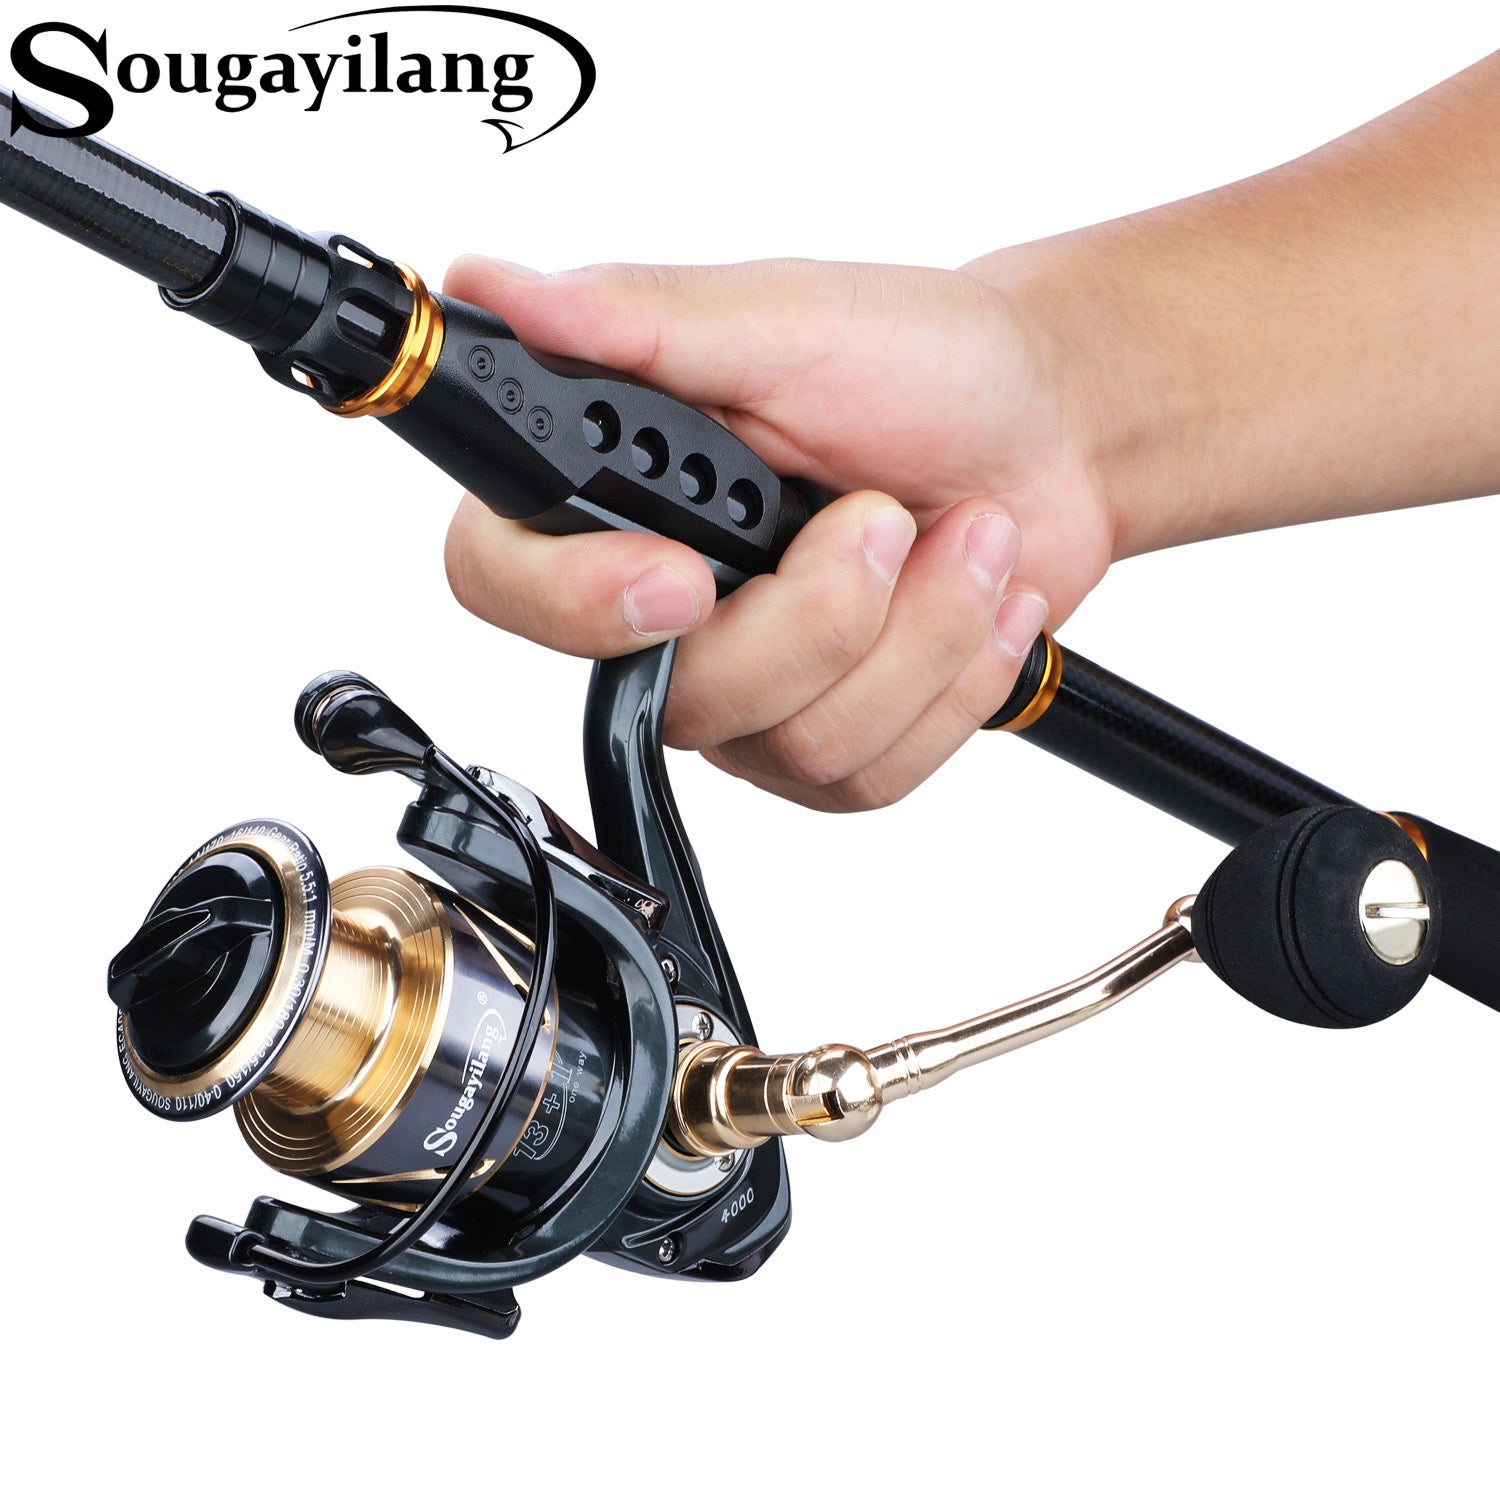 Spinning Fishing Reel 2000-7000 Max Drag 8kg Gear Ratio 5.1:1 Lure Spinning  Reel Fishing Tackle Supplies 